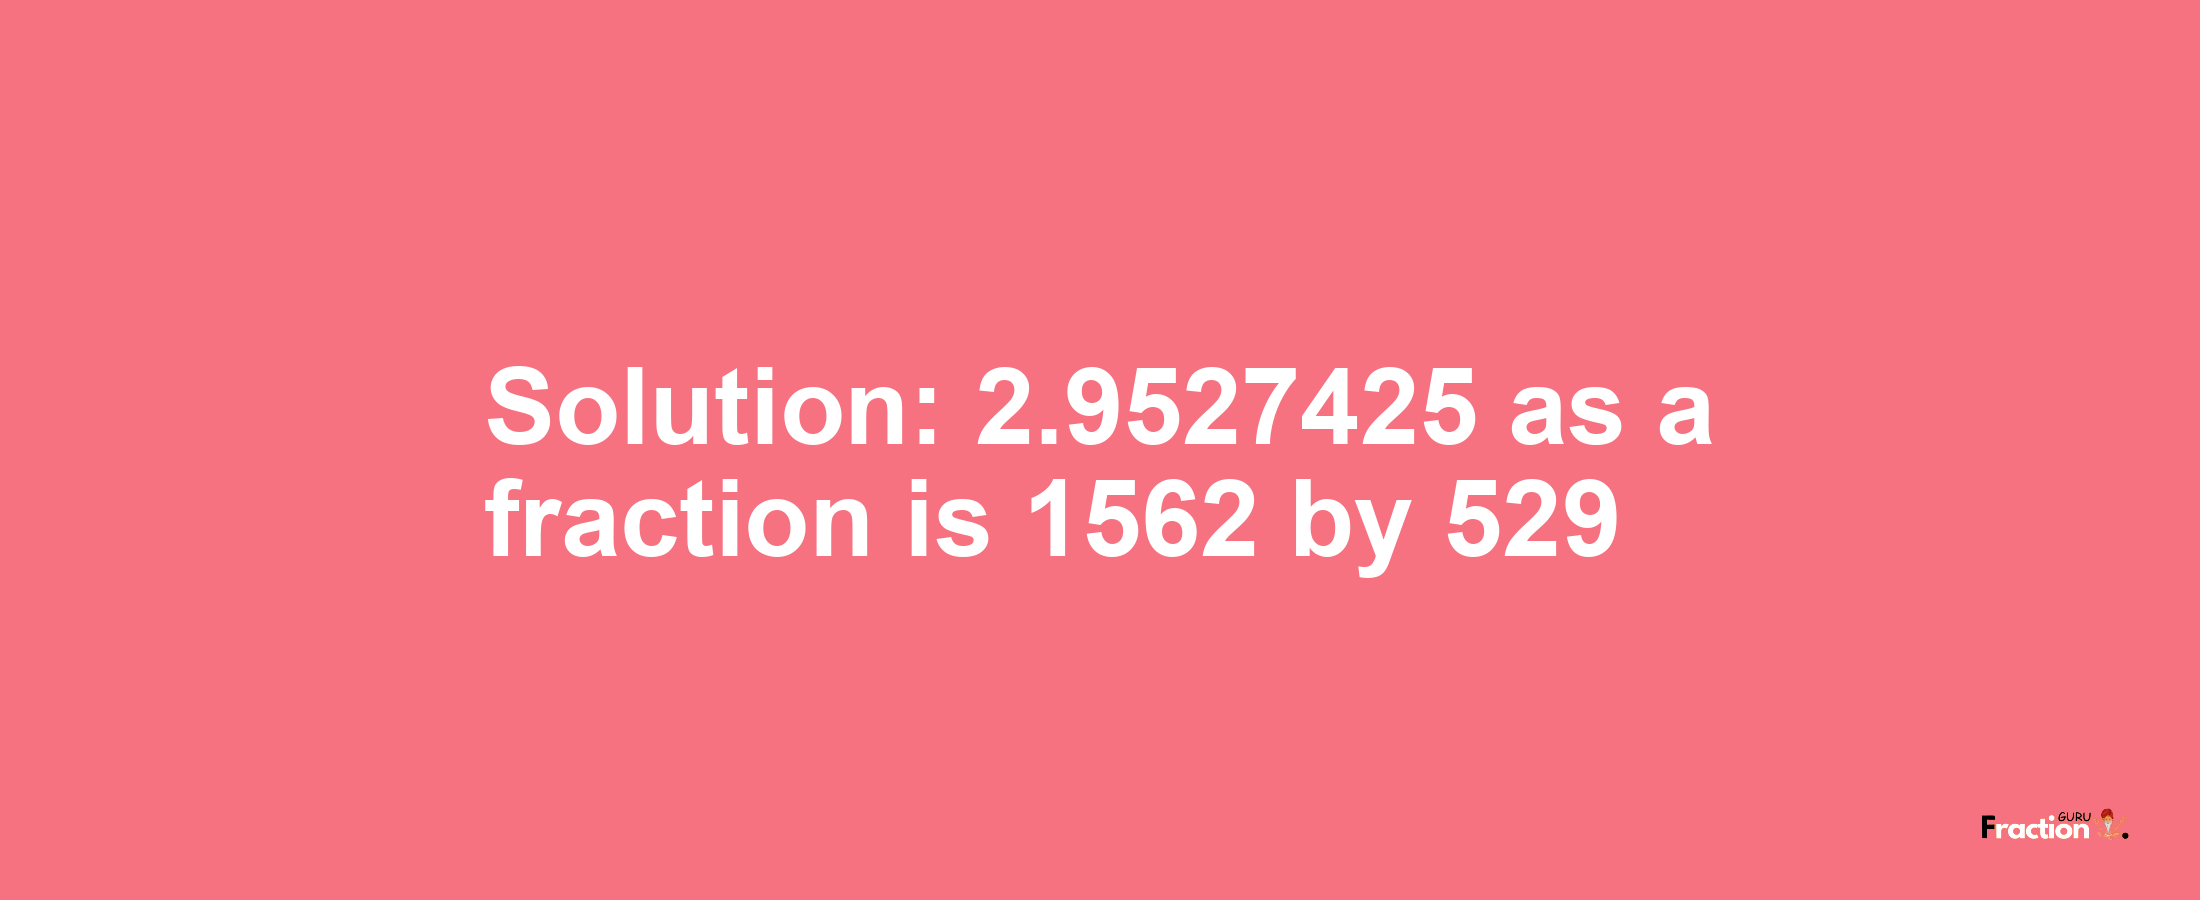 Solution:2.9527425 as a fraction is 1562/529